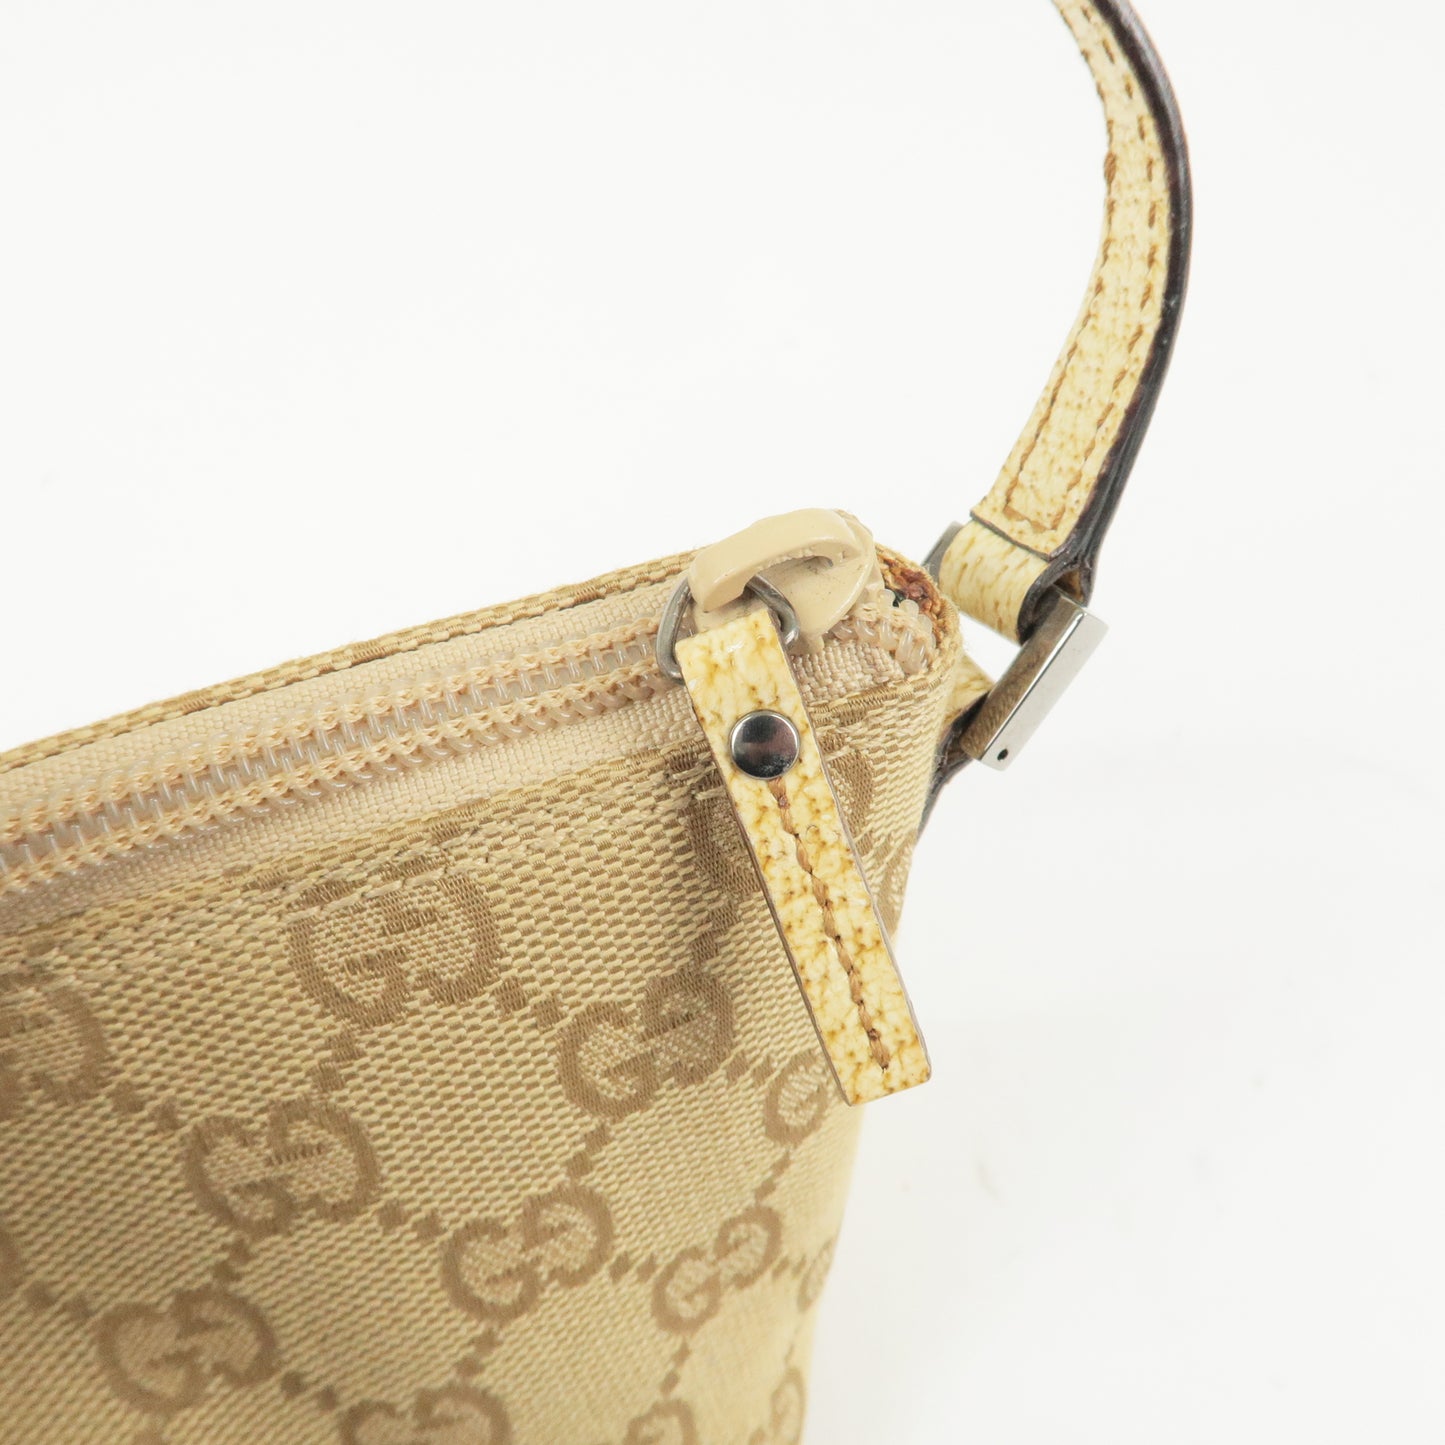 GUCCI GG Canvas Leather Boat Bag Hand Bag Pouch Beige 07198